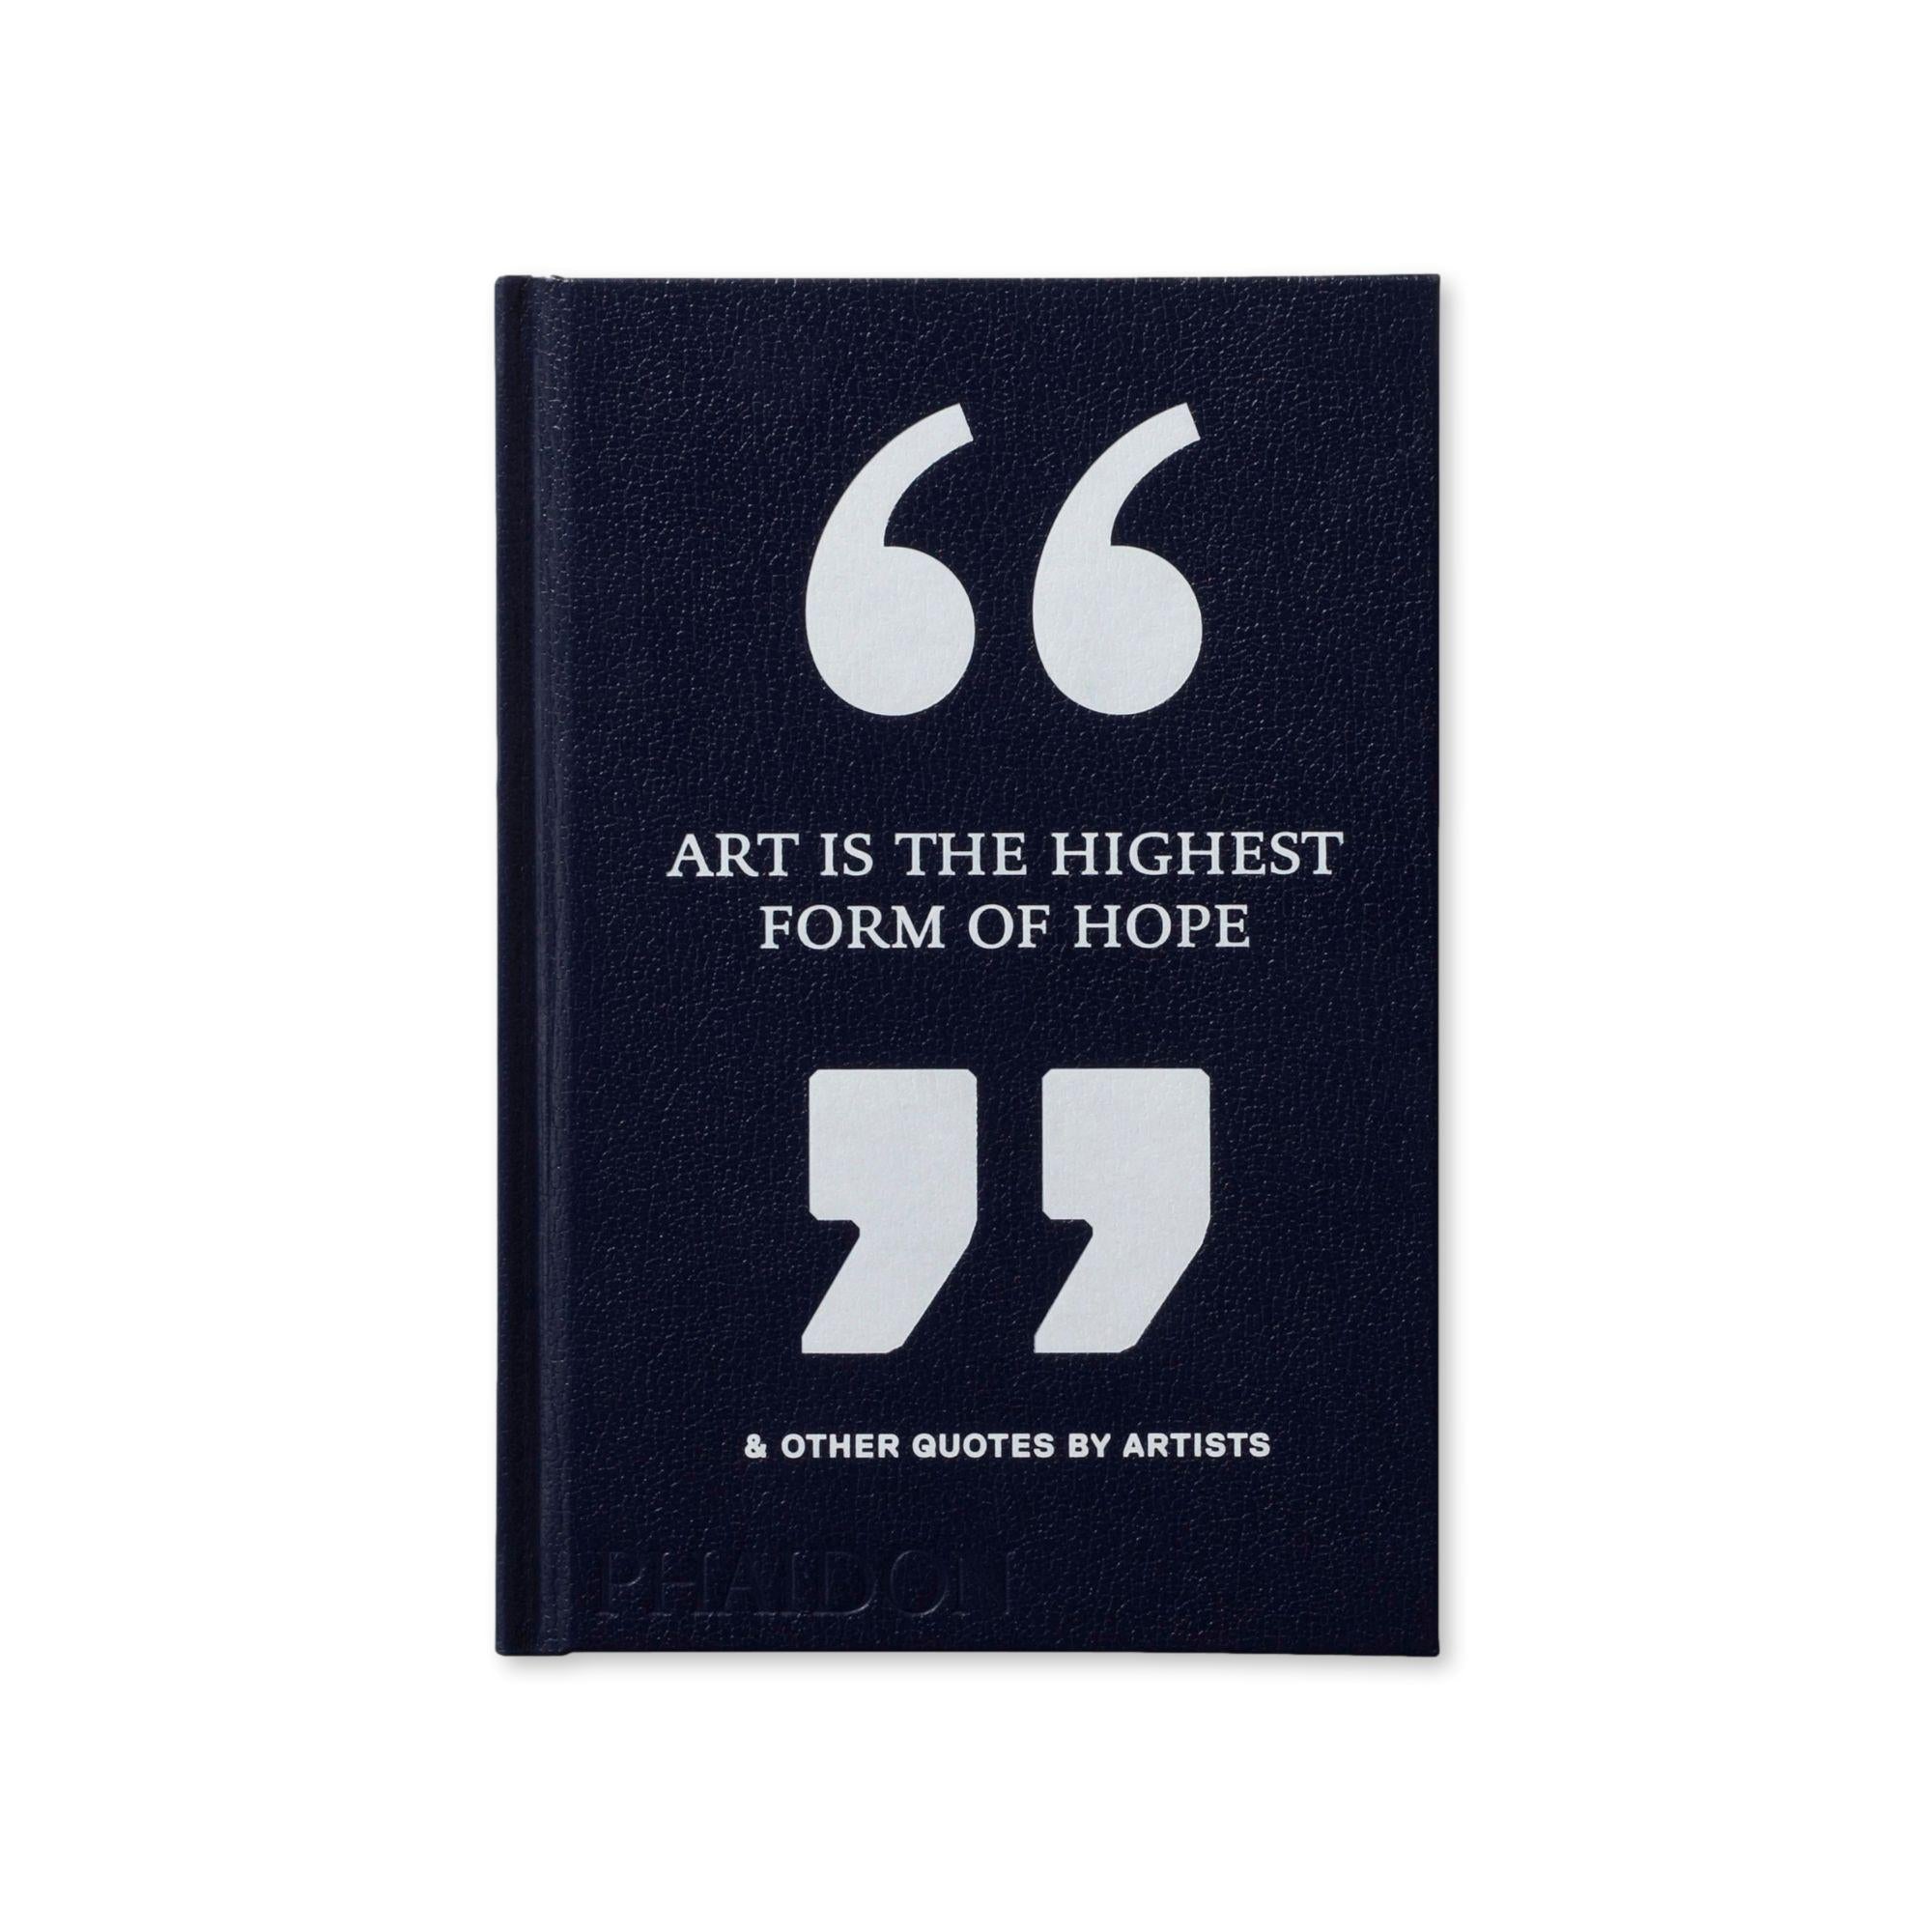 Art Is the Highest Form of Hope & Other Quotes by Artists Book Phaidon